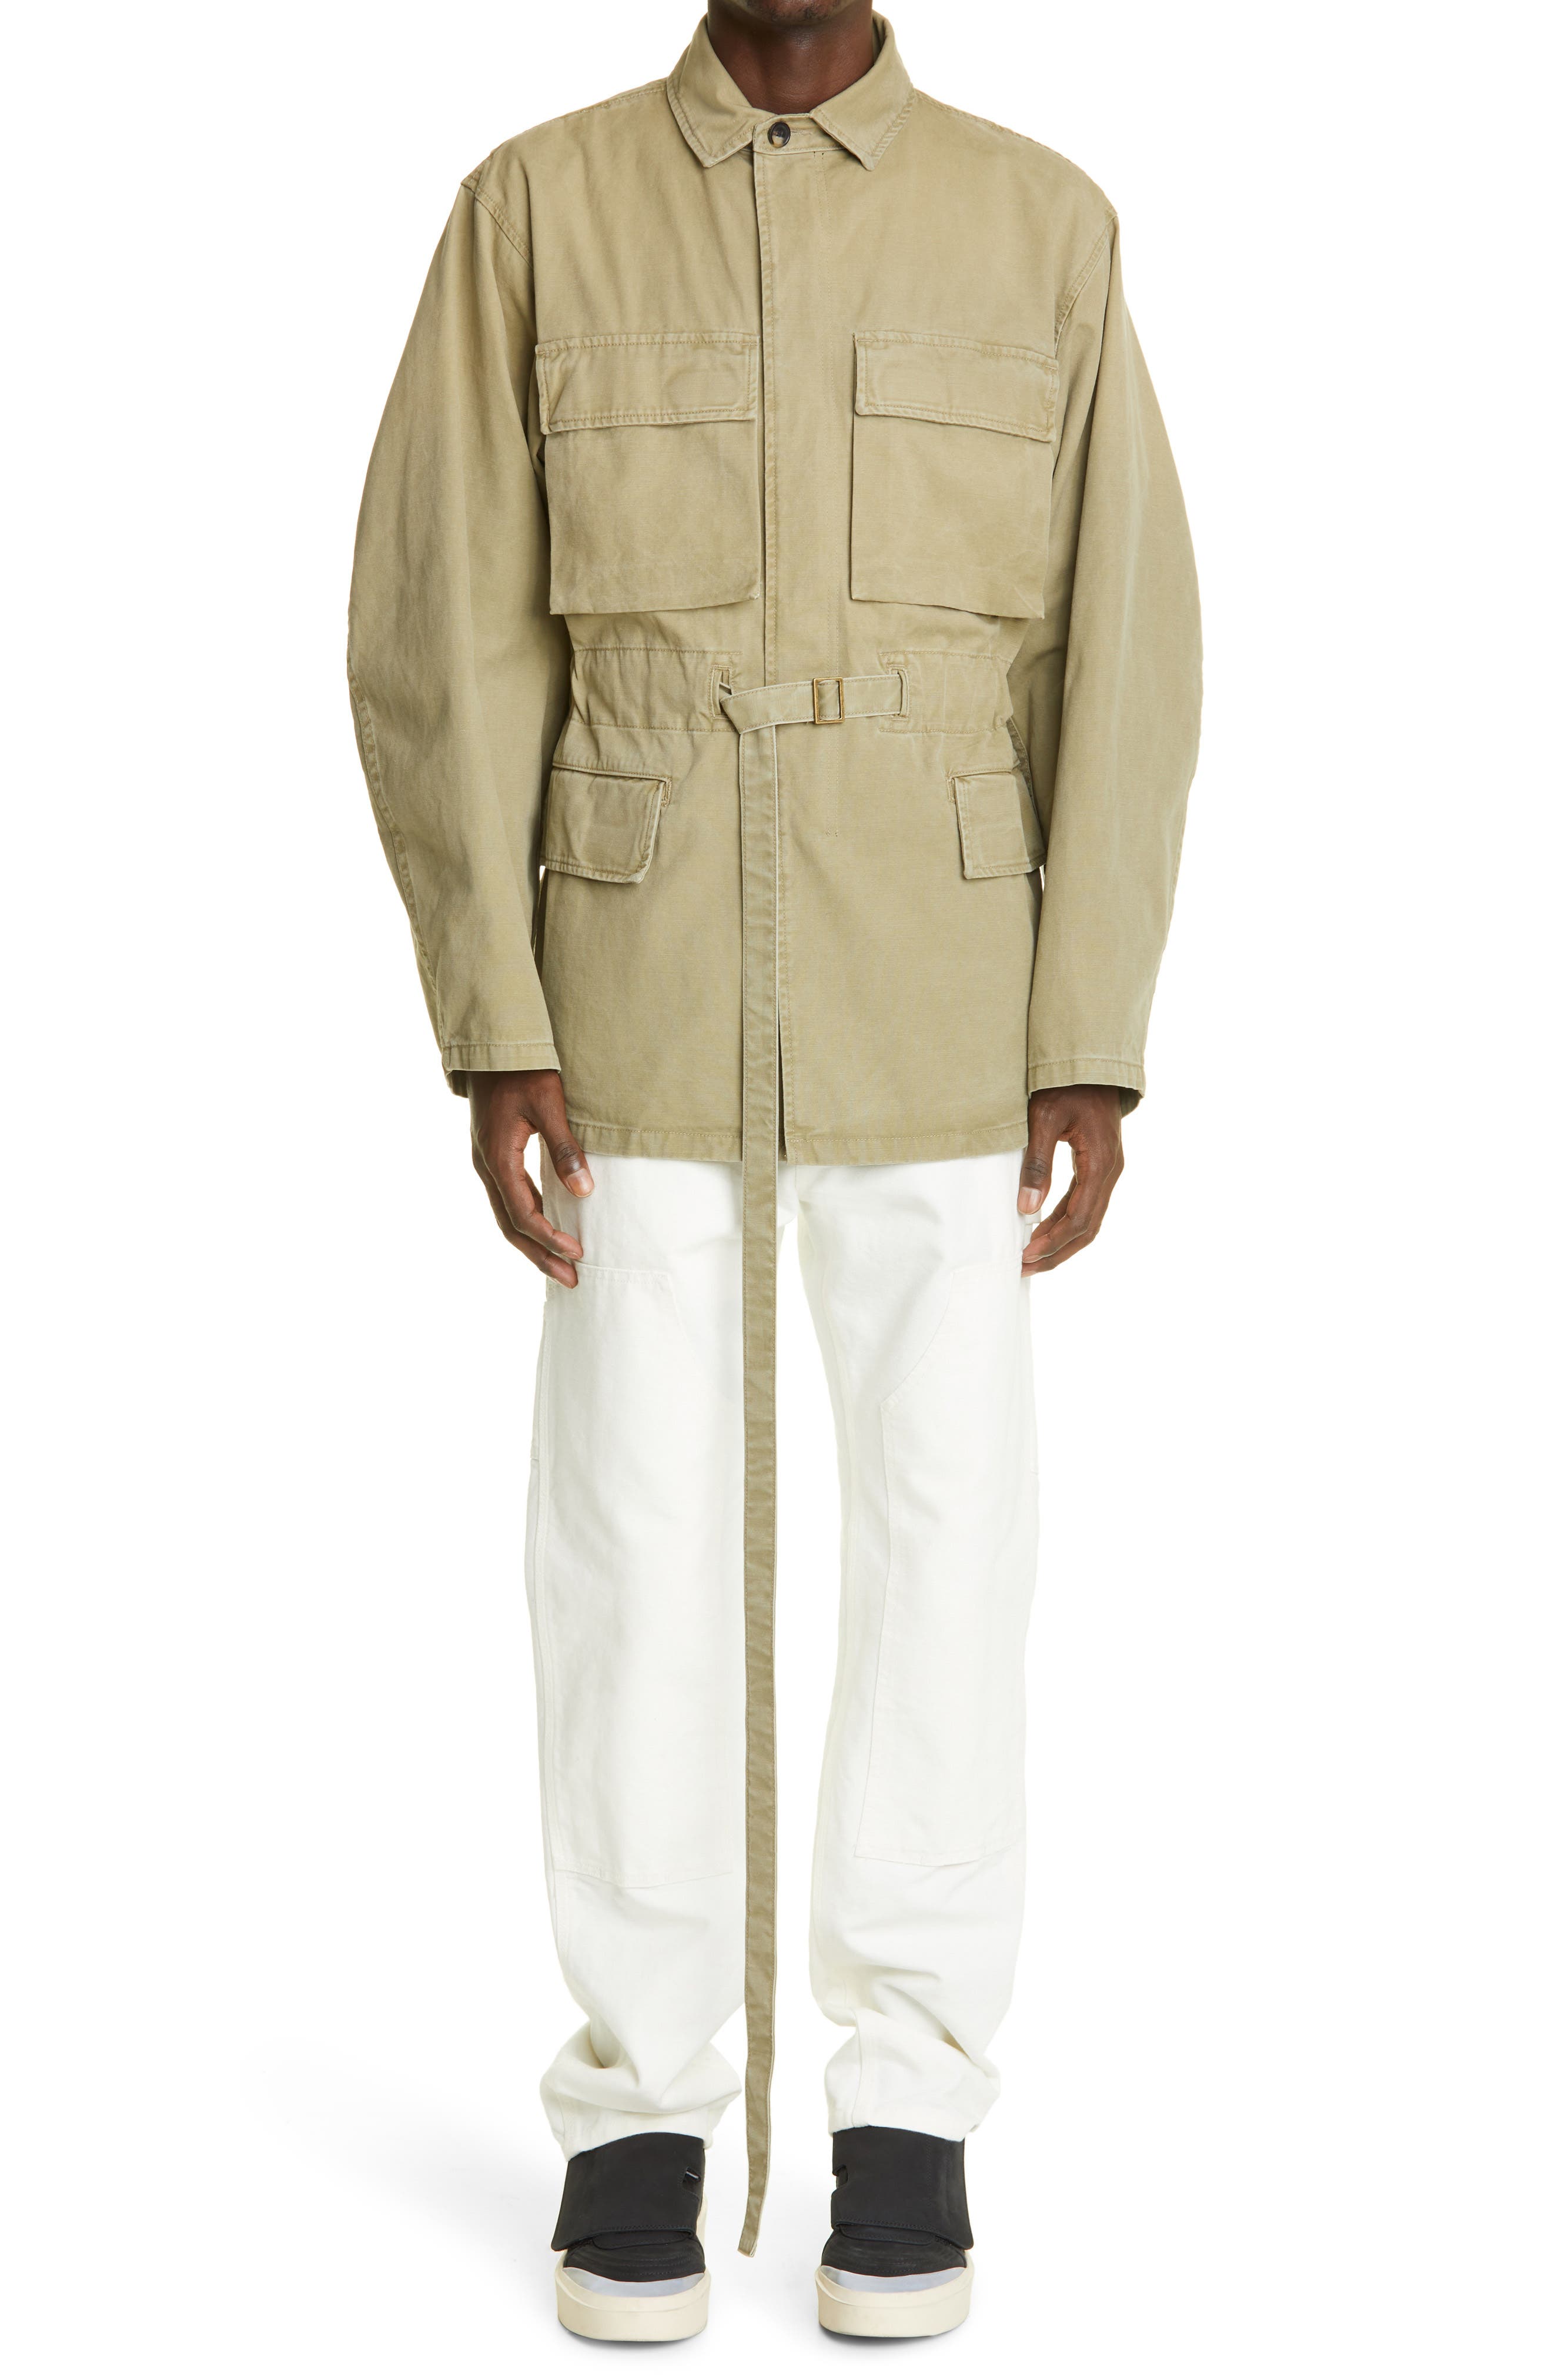 Fear of God Parachute Belted Canvas Jacket in Army at Nordstrom, Size Small